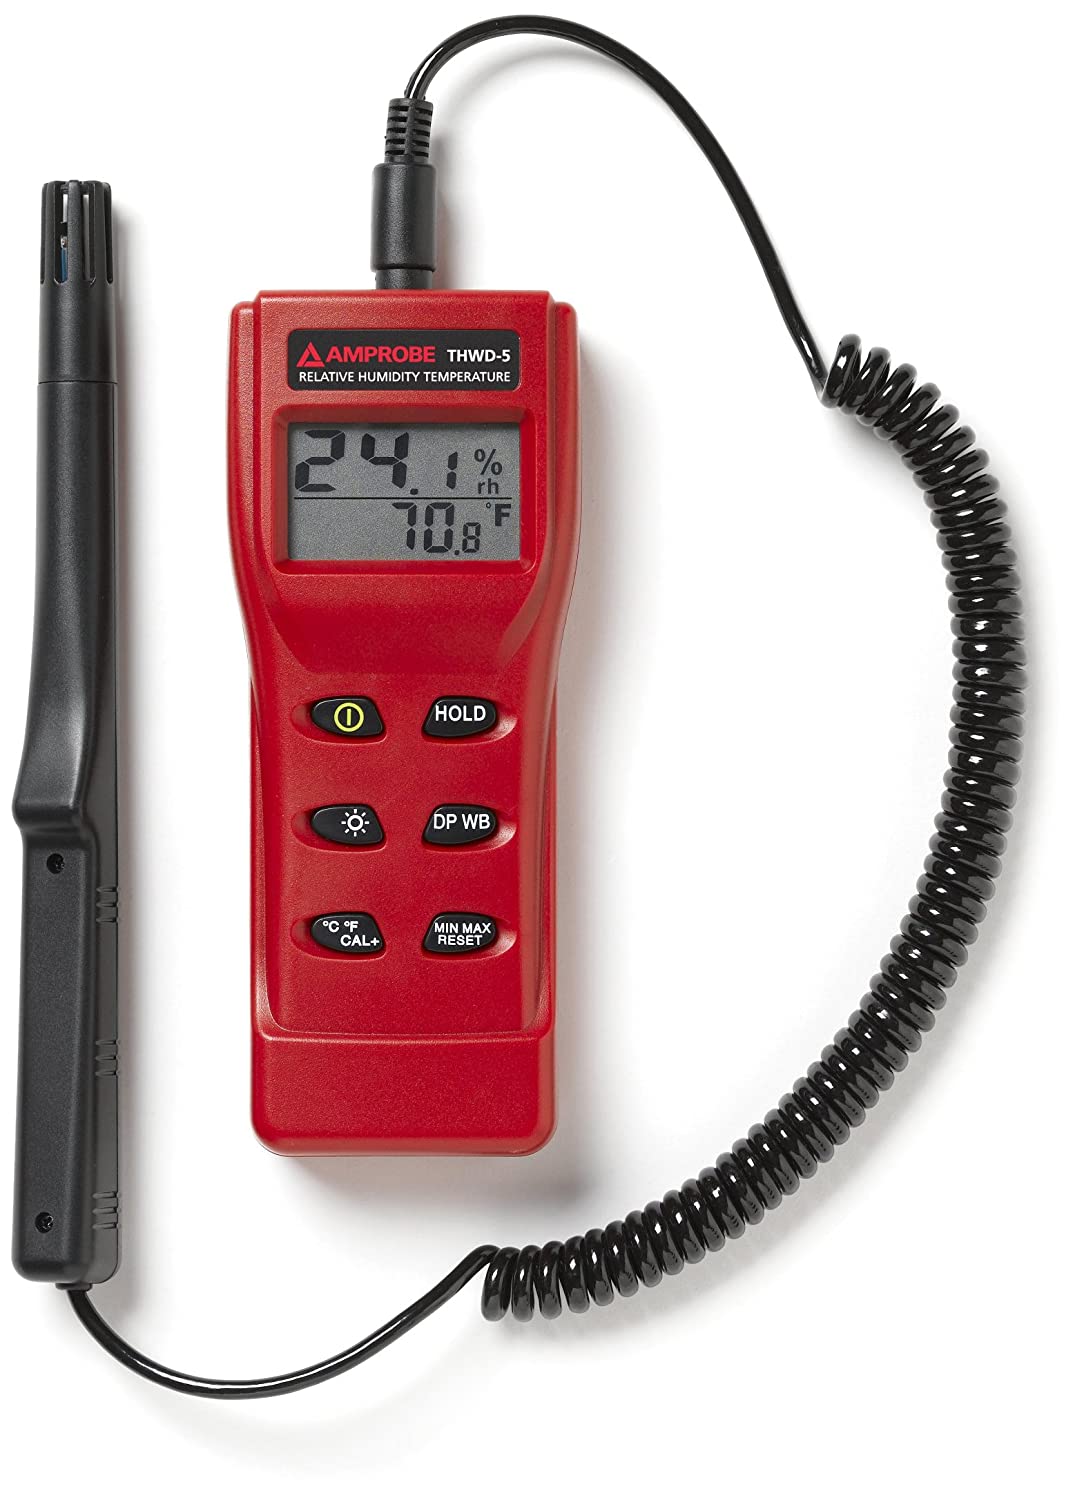 Amprobe THWD 5 Relative Humidity and Temperature Meter with Wet Bulb and Dew Point